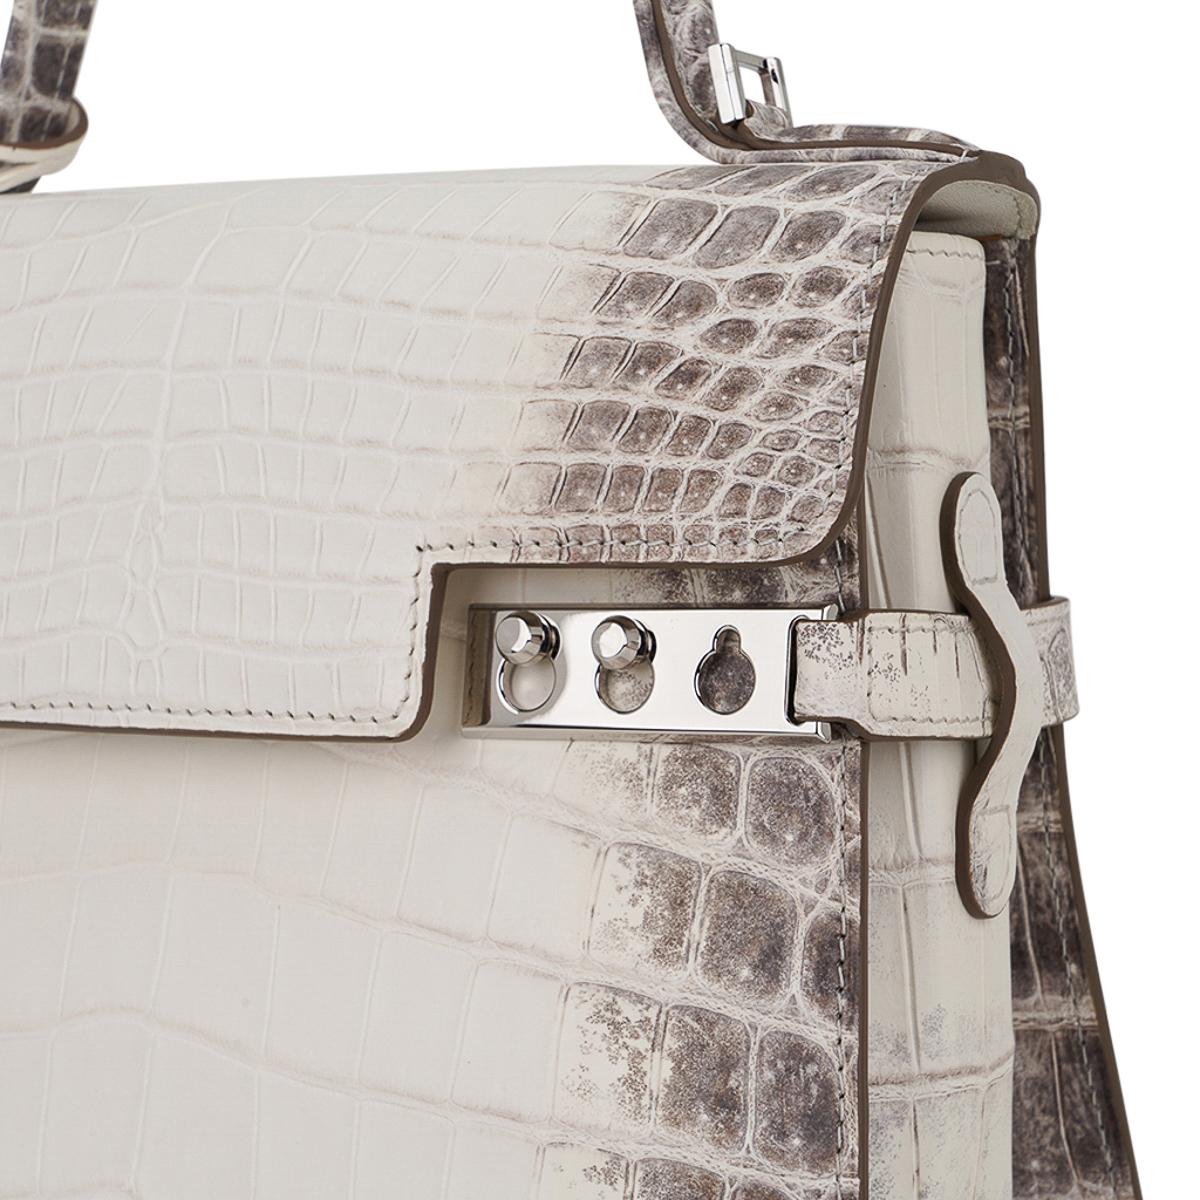 Delvaux Tempete PM Himalaya Crocodile Limited Edition Bag For Sale 4